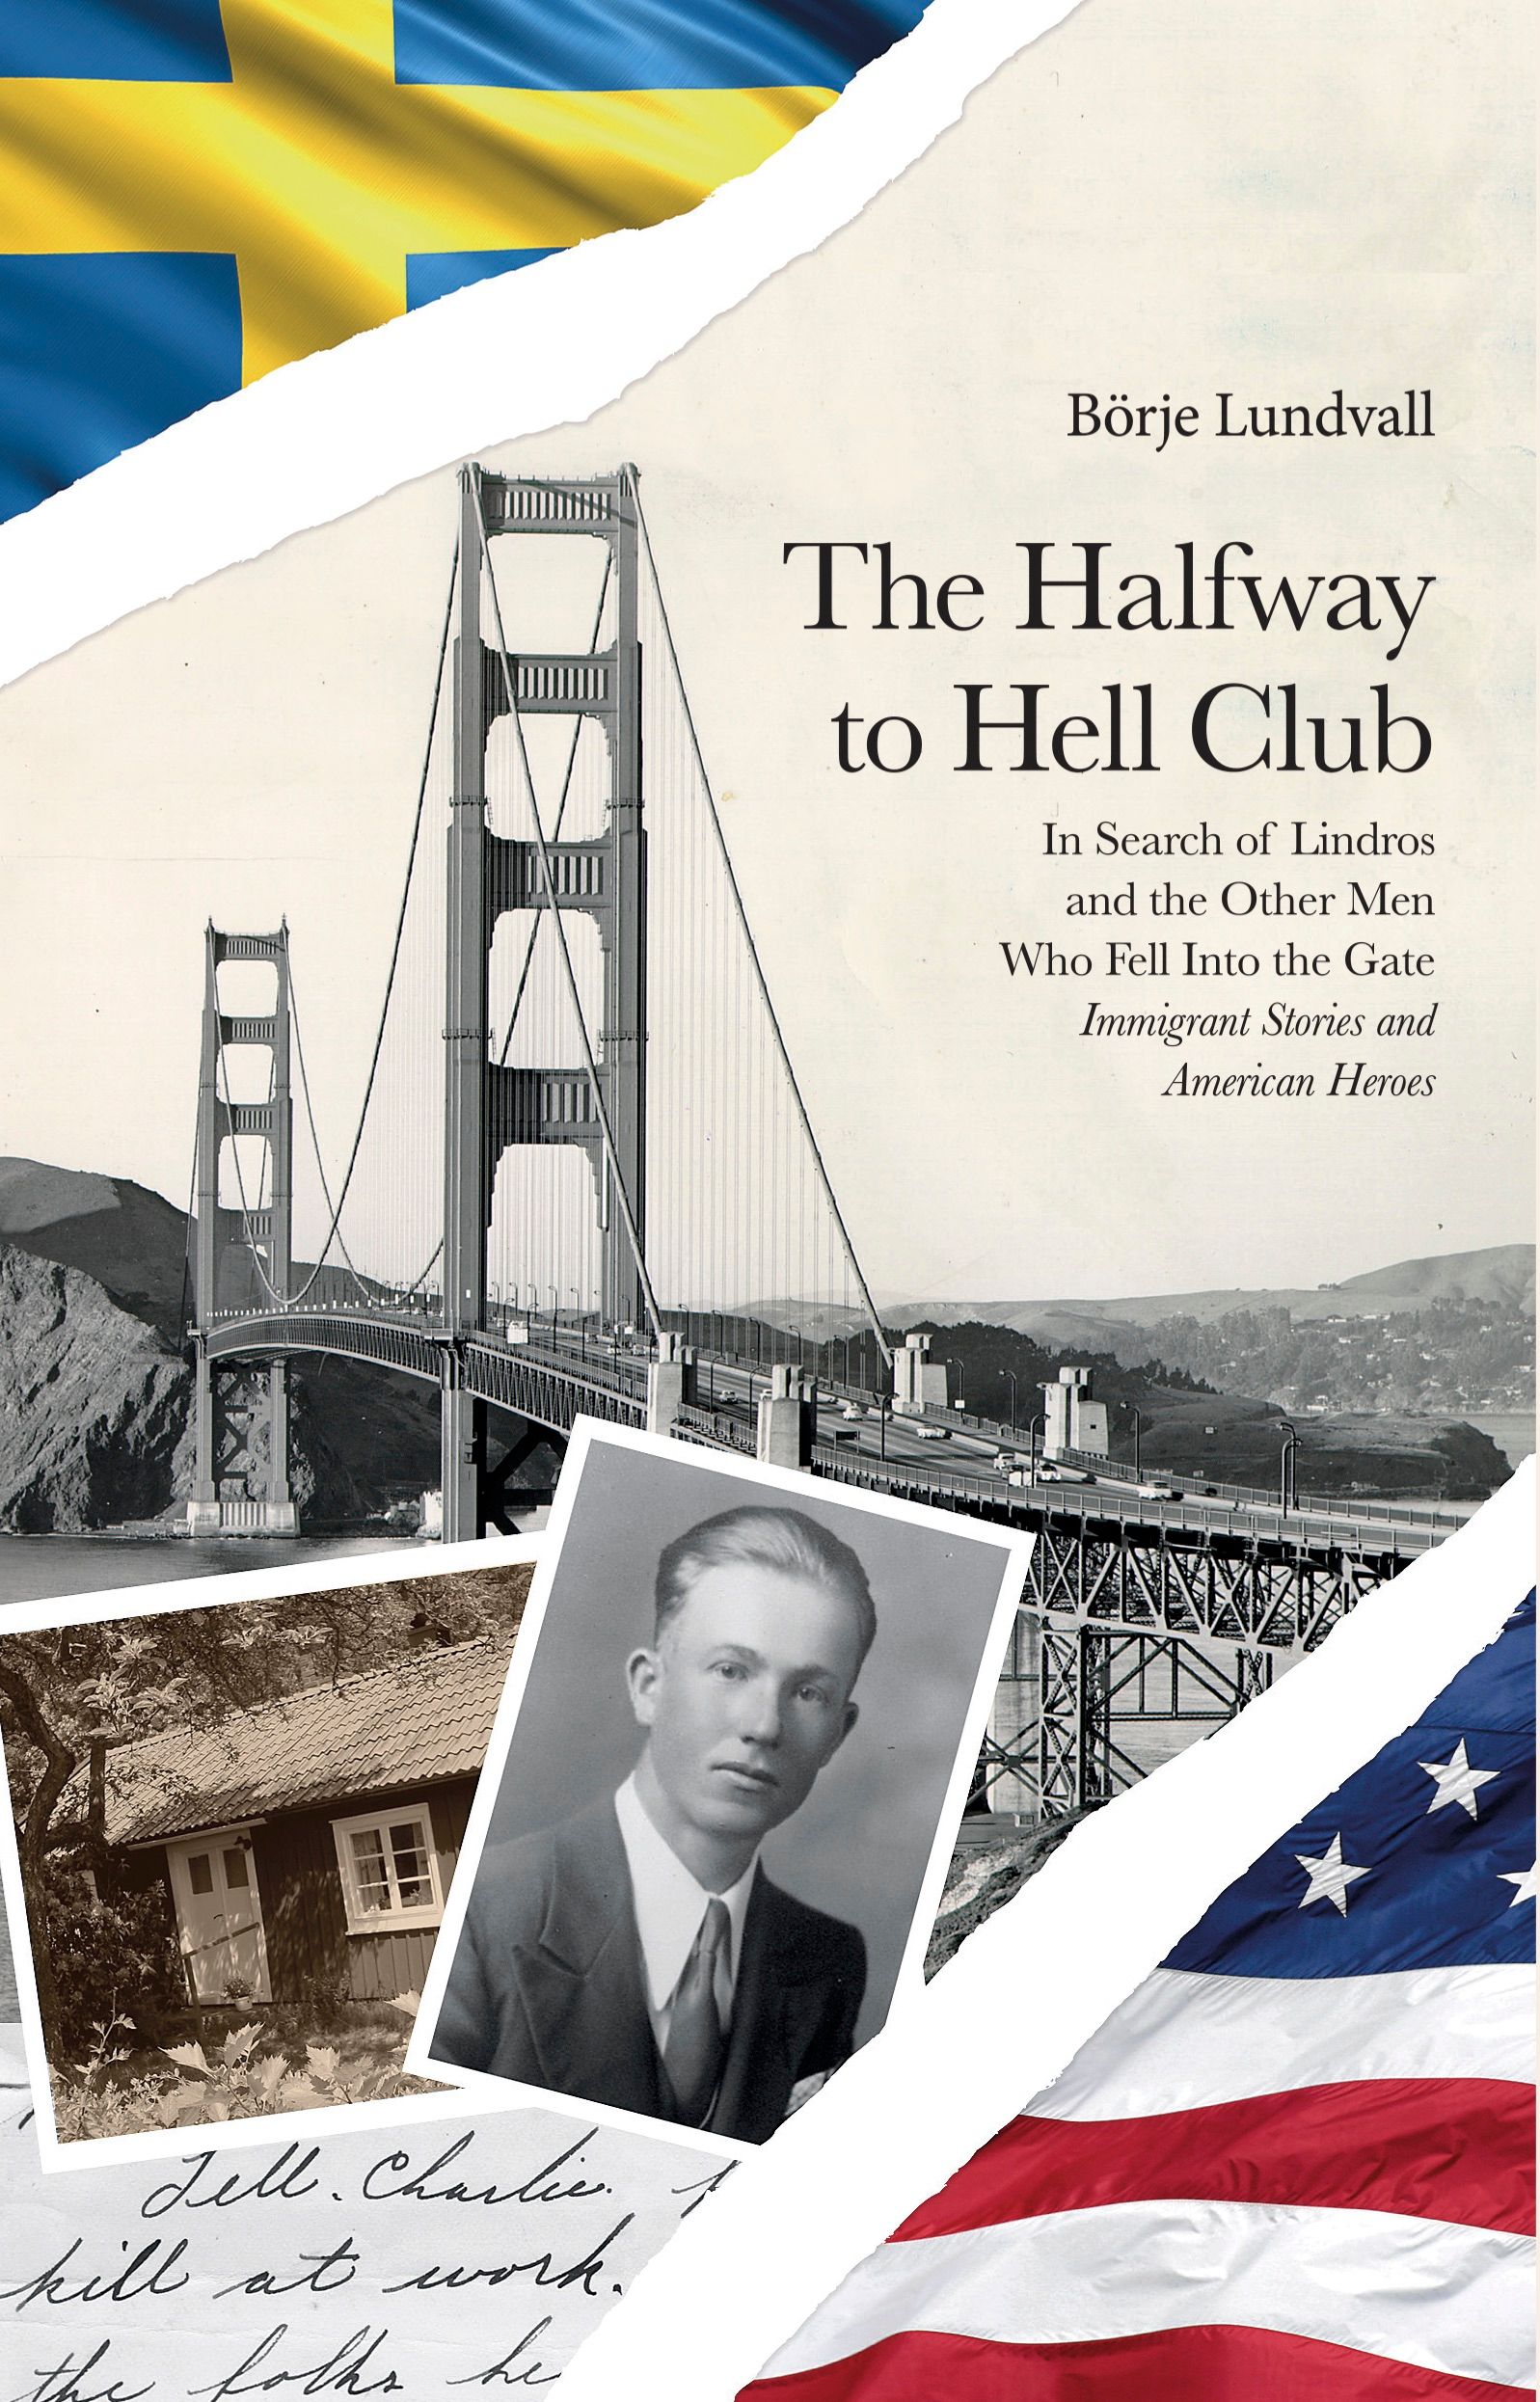 The Halfway to Hell Club, eBook by Börje Lundvall